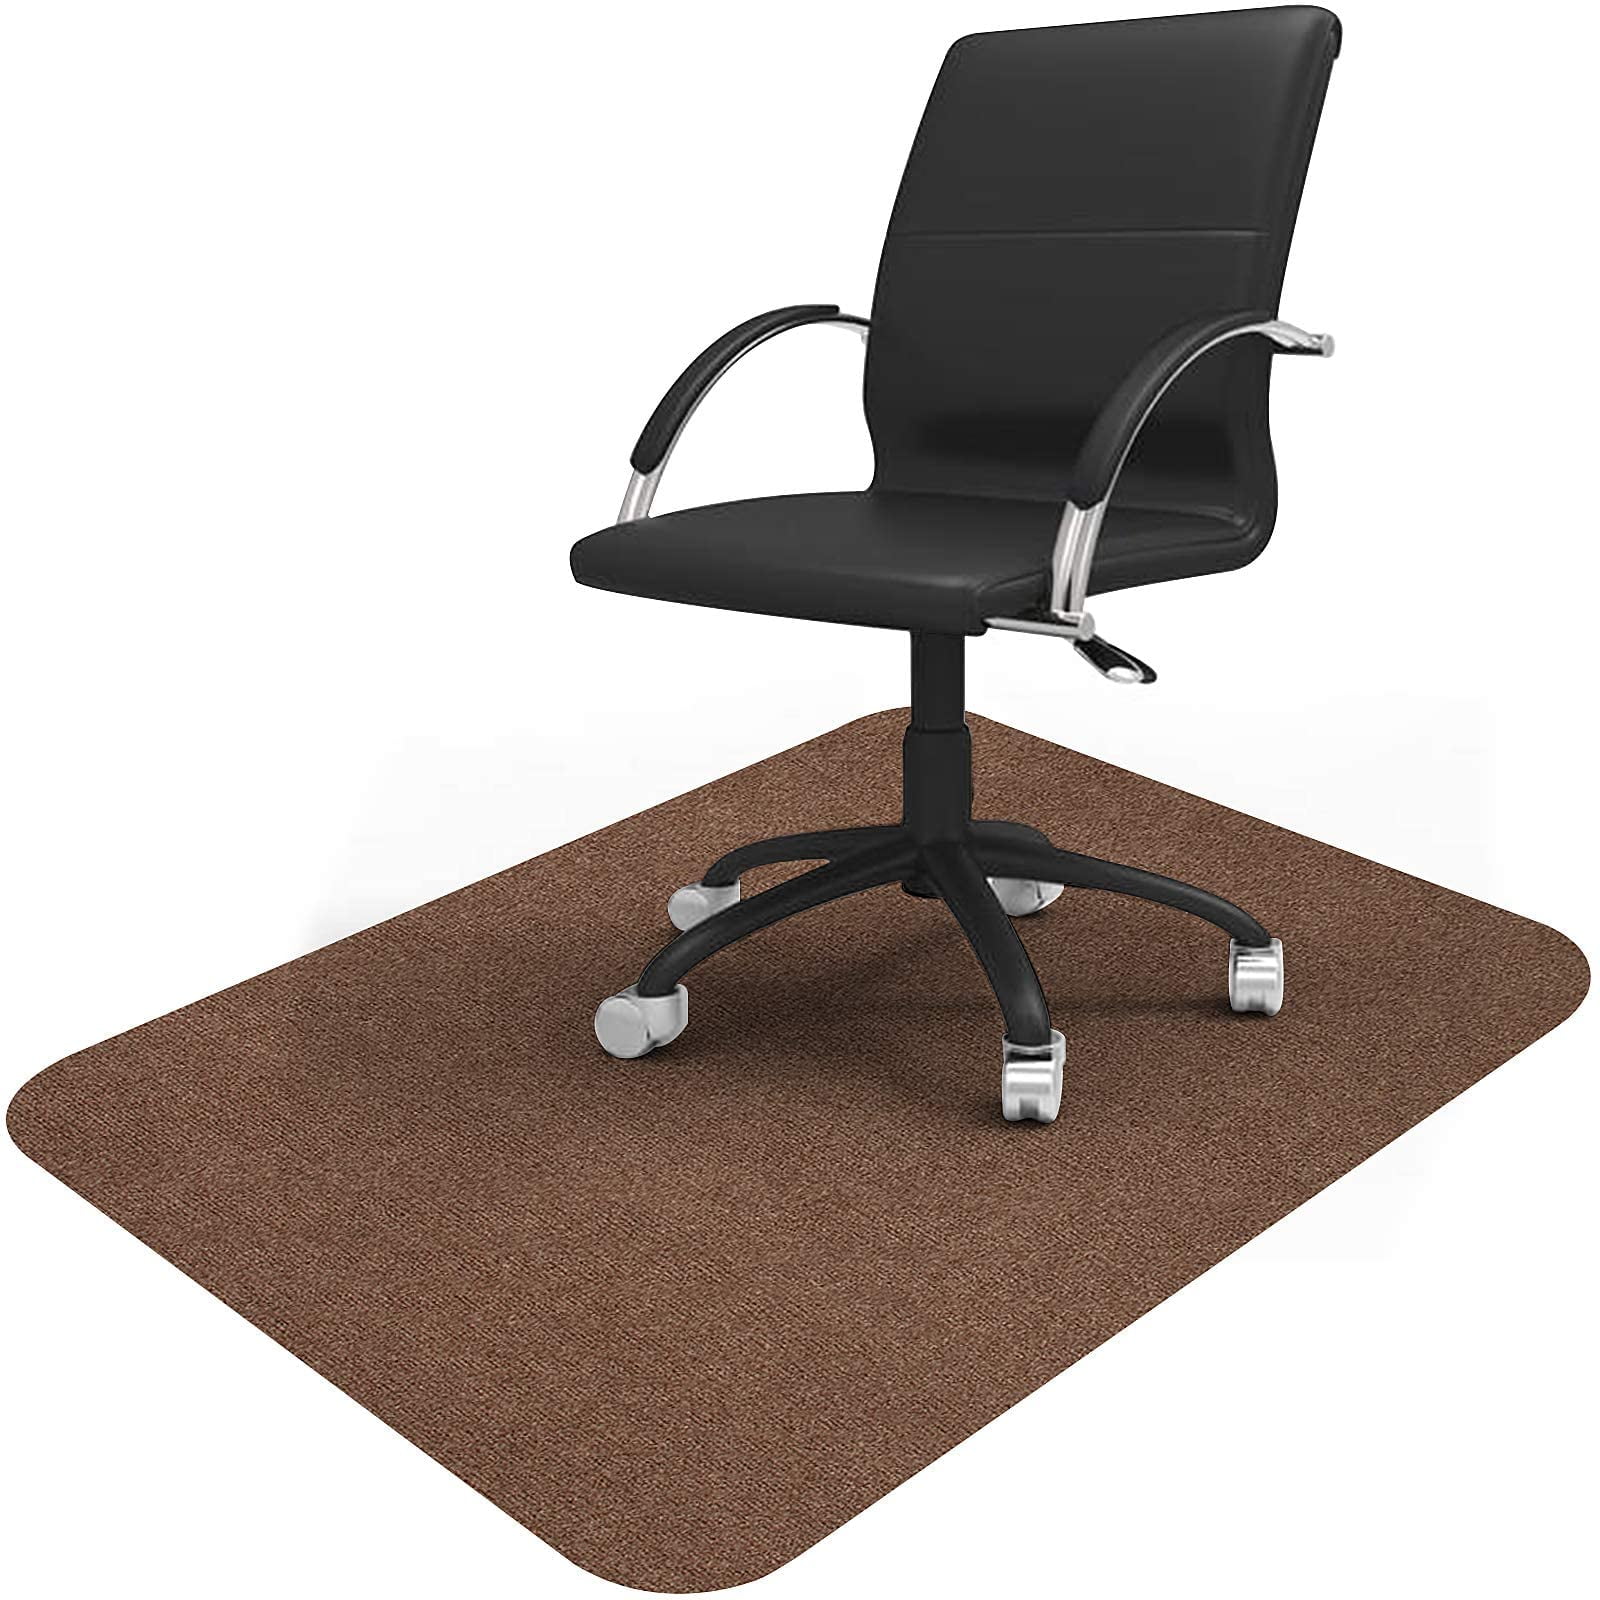 ANMINY Office Chair Mat Protector for Hard Floor Hardwood Tile Floor Under The Desk Rolling Chair Thick Mats Carpet Rug Coffee 47 x 35 inch No Residue Noise Reduction Non-Slip Strong Adhesive 